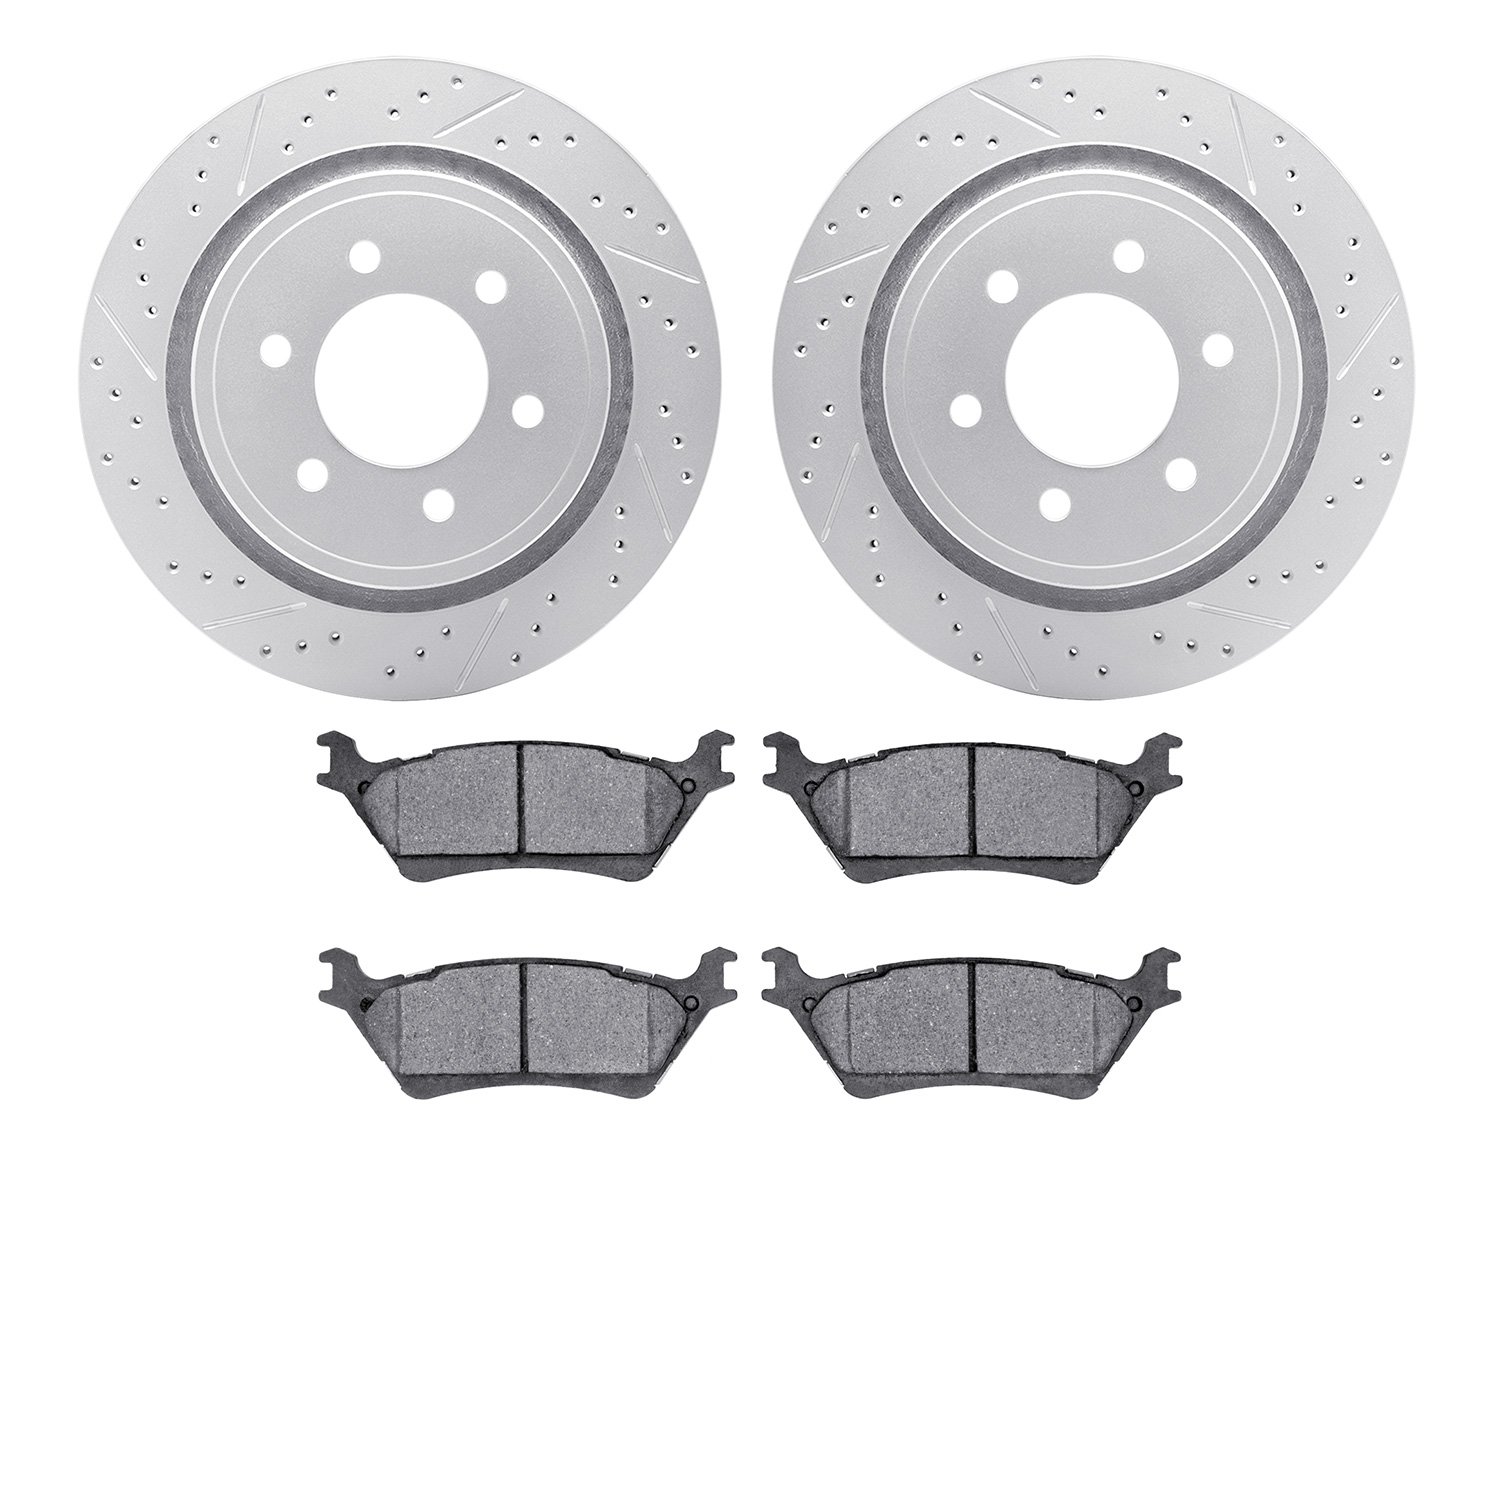 2202-54012 Geoperformance Drilled/Slotted Rotors w/Heavy-Duty Pads Kit, 2012-2020 Ford/Lincoln/Mercury/Mazda, Position: Rear